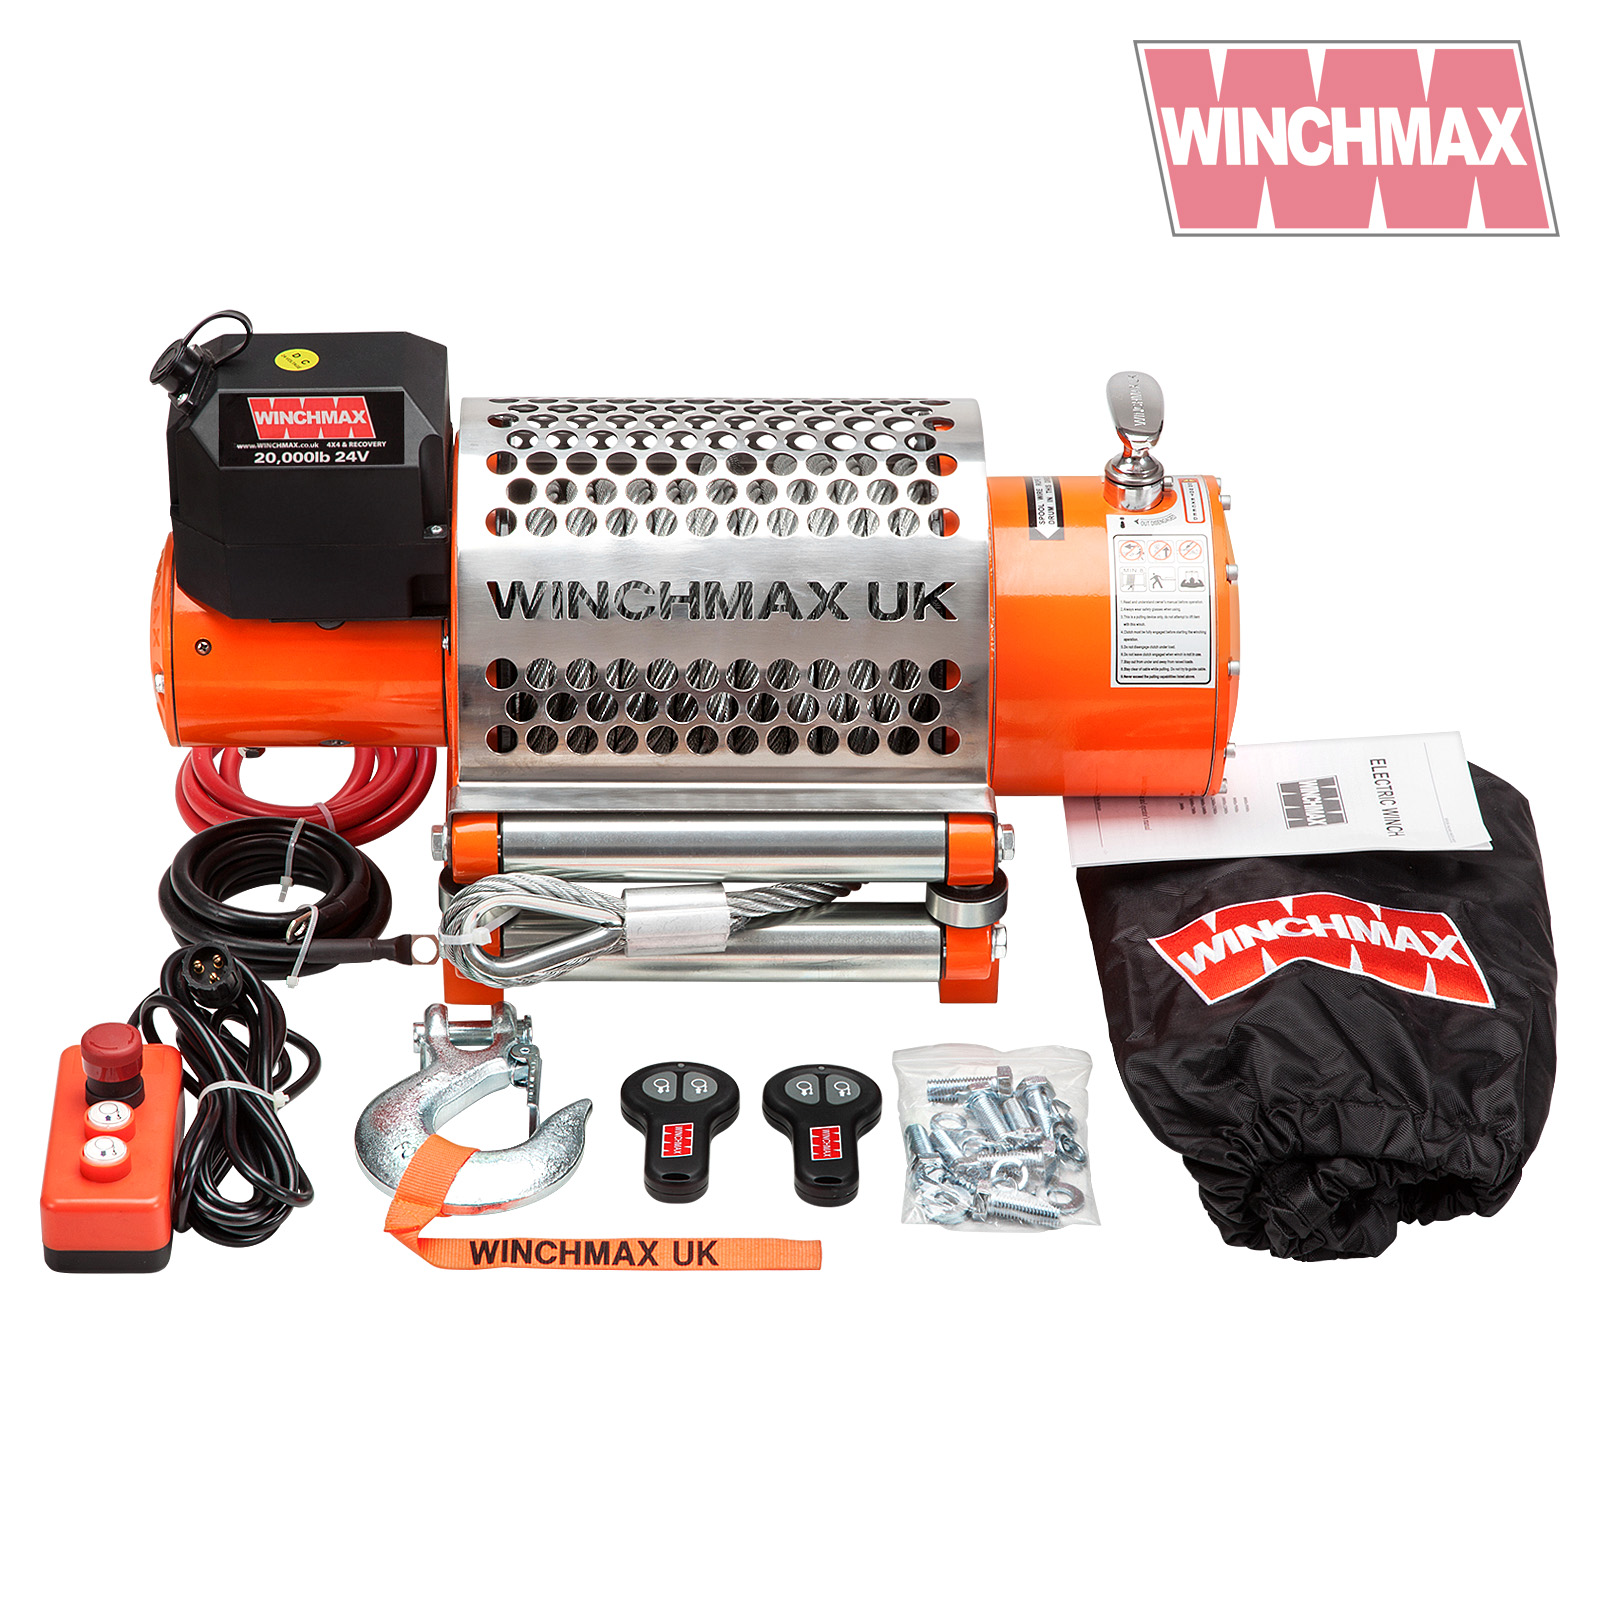 Winchmax 20000lb 24v Winch. Steel Rope and Twin Remote Controls